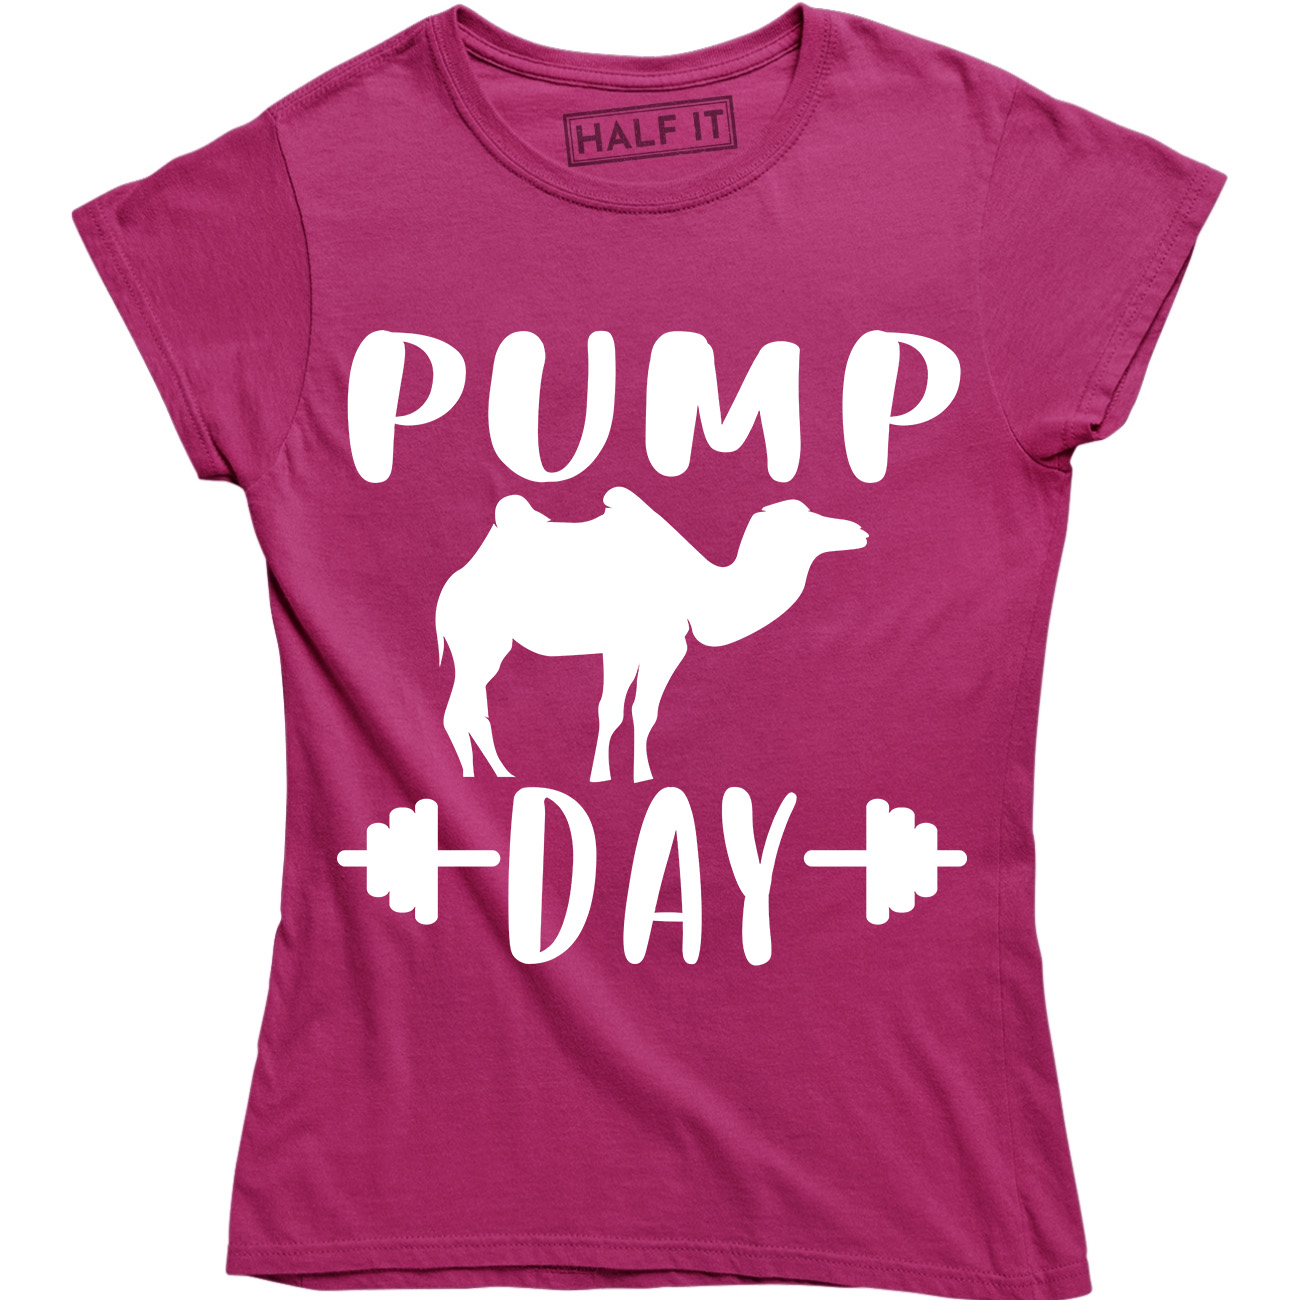 Pump Day WooHoo Graphic Workout Gym Fitness Women's T-Shirt - image 1 of 4